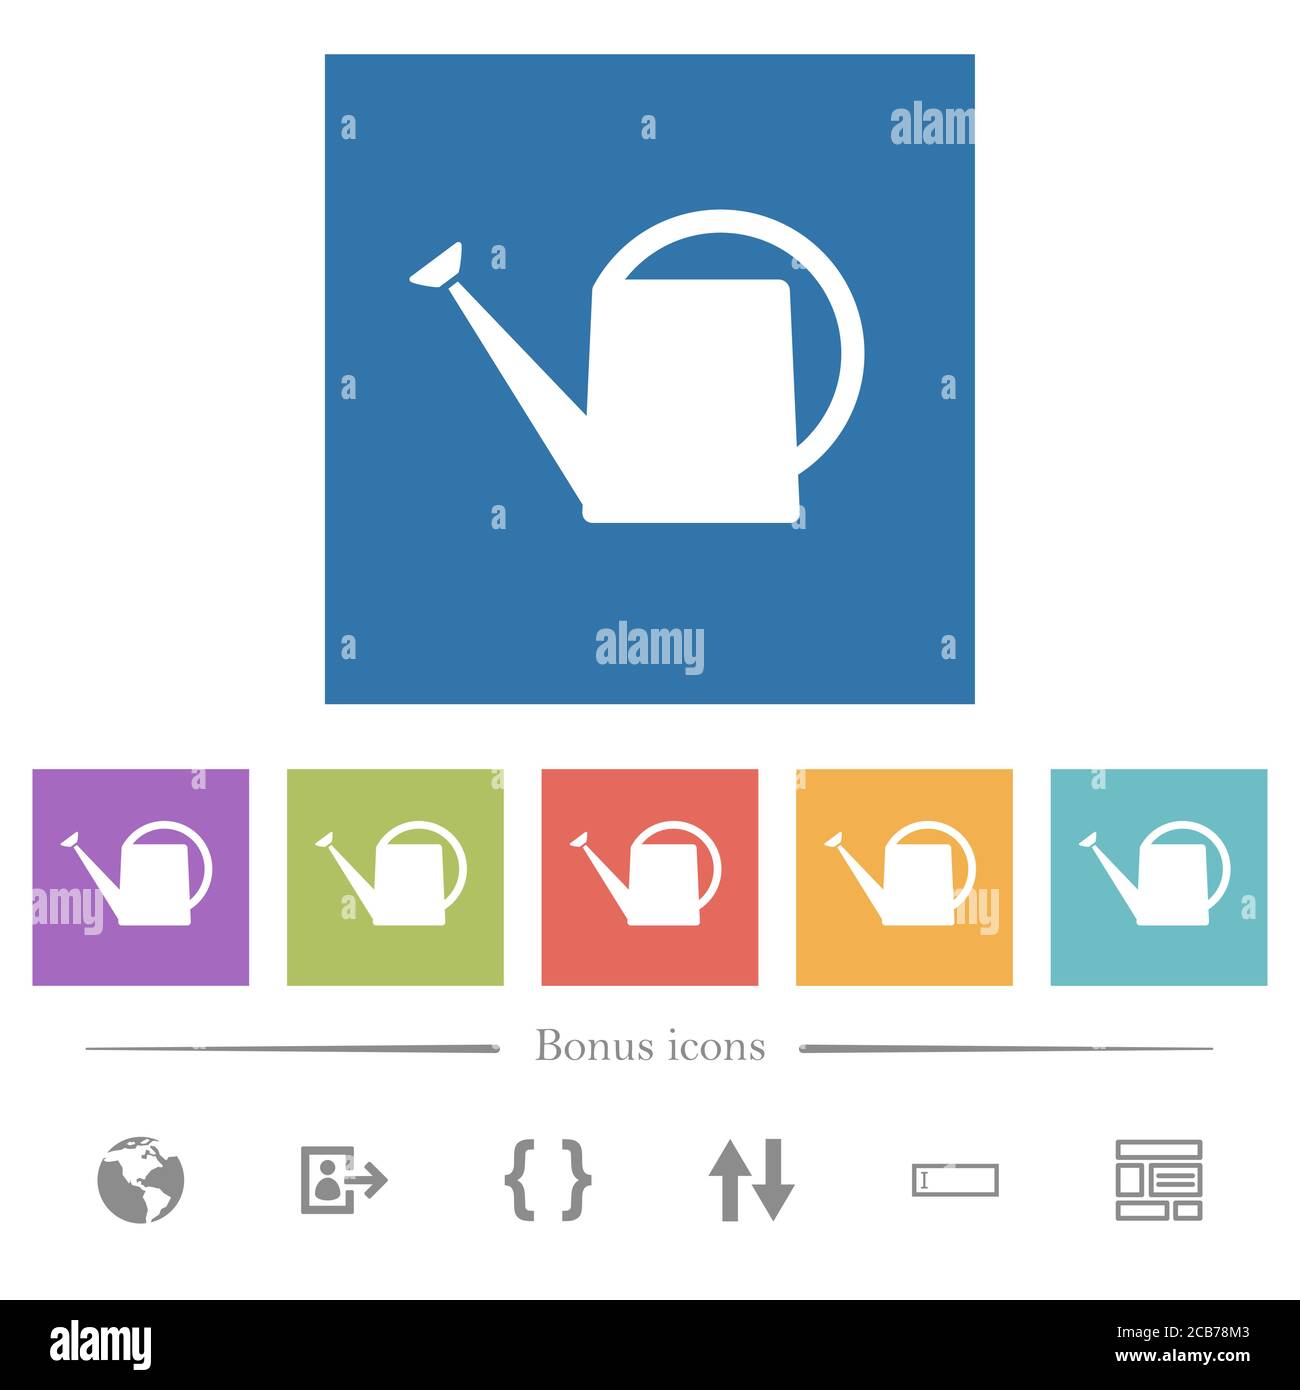 Watering can flat white icons in square backgrounds. 6 bonus icons included. Stock Vector